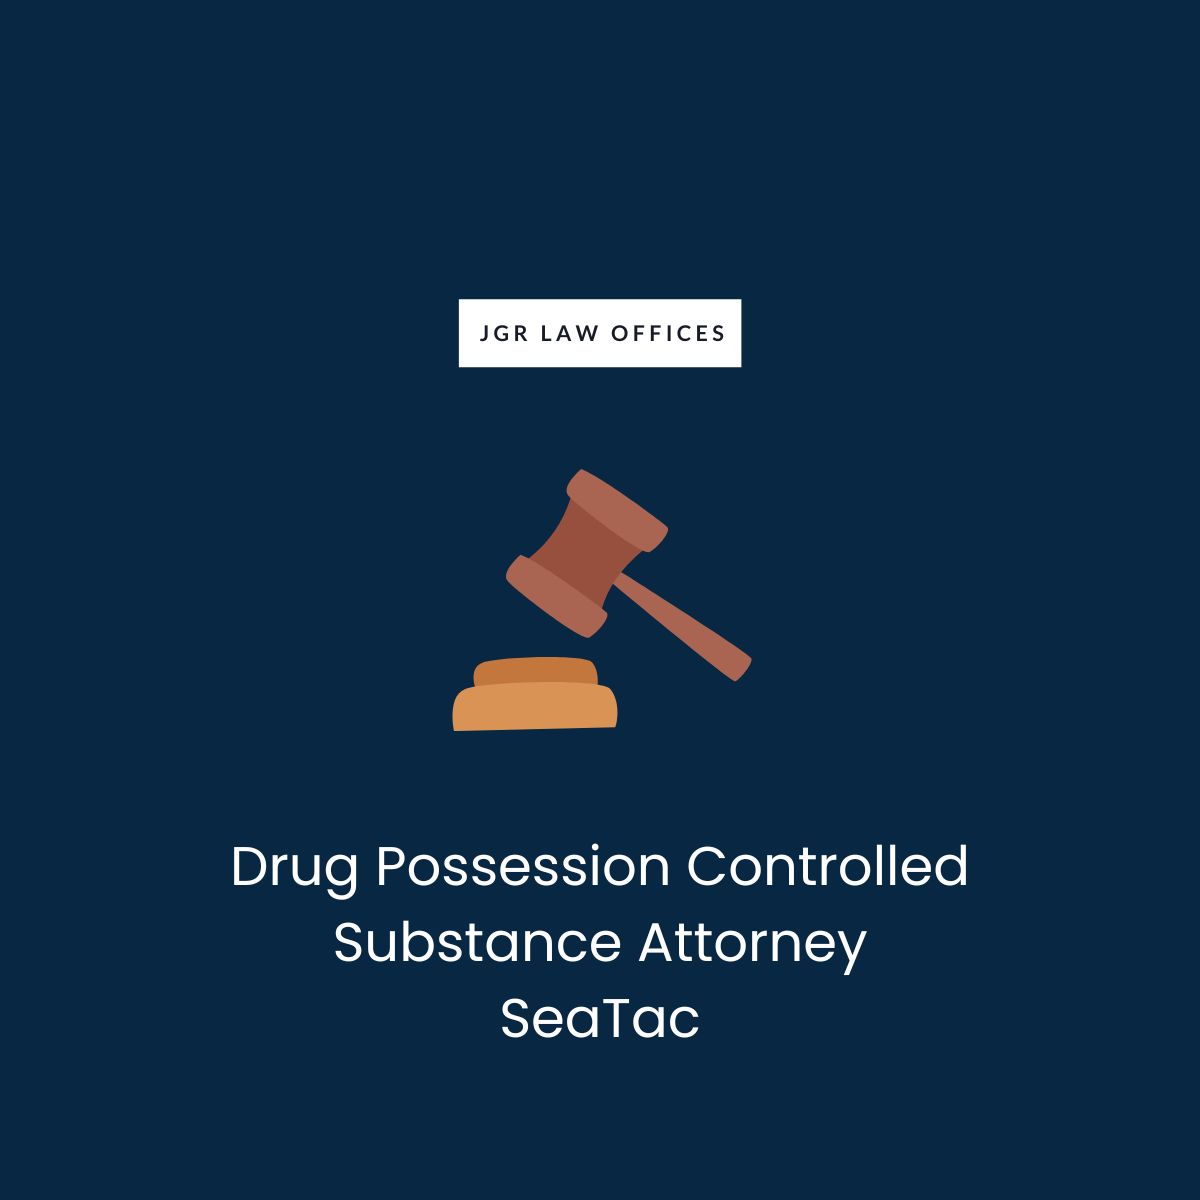 Drug Possession Controlled Substance Attorney SeaTac